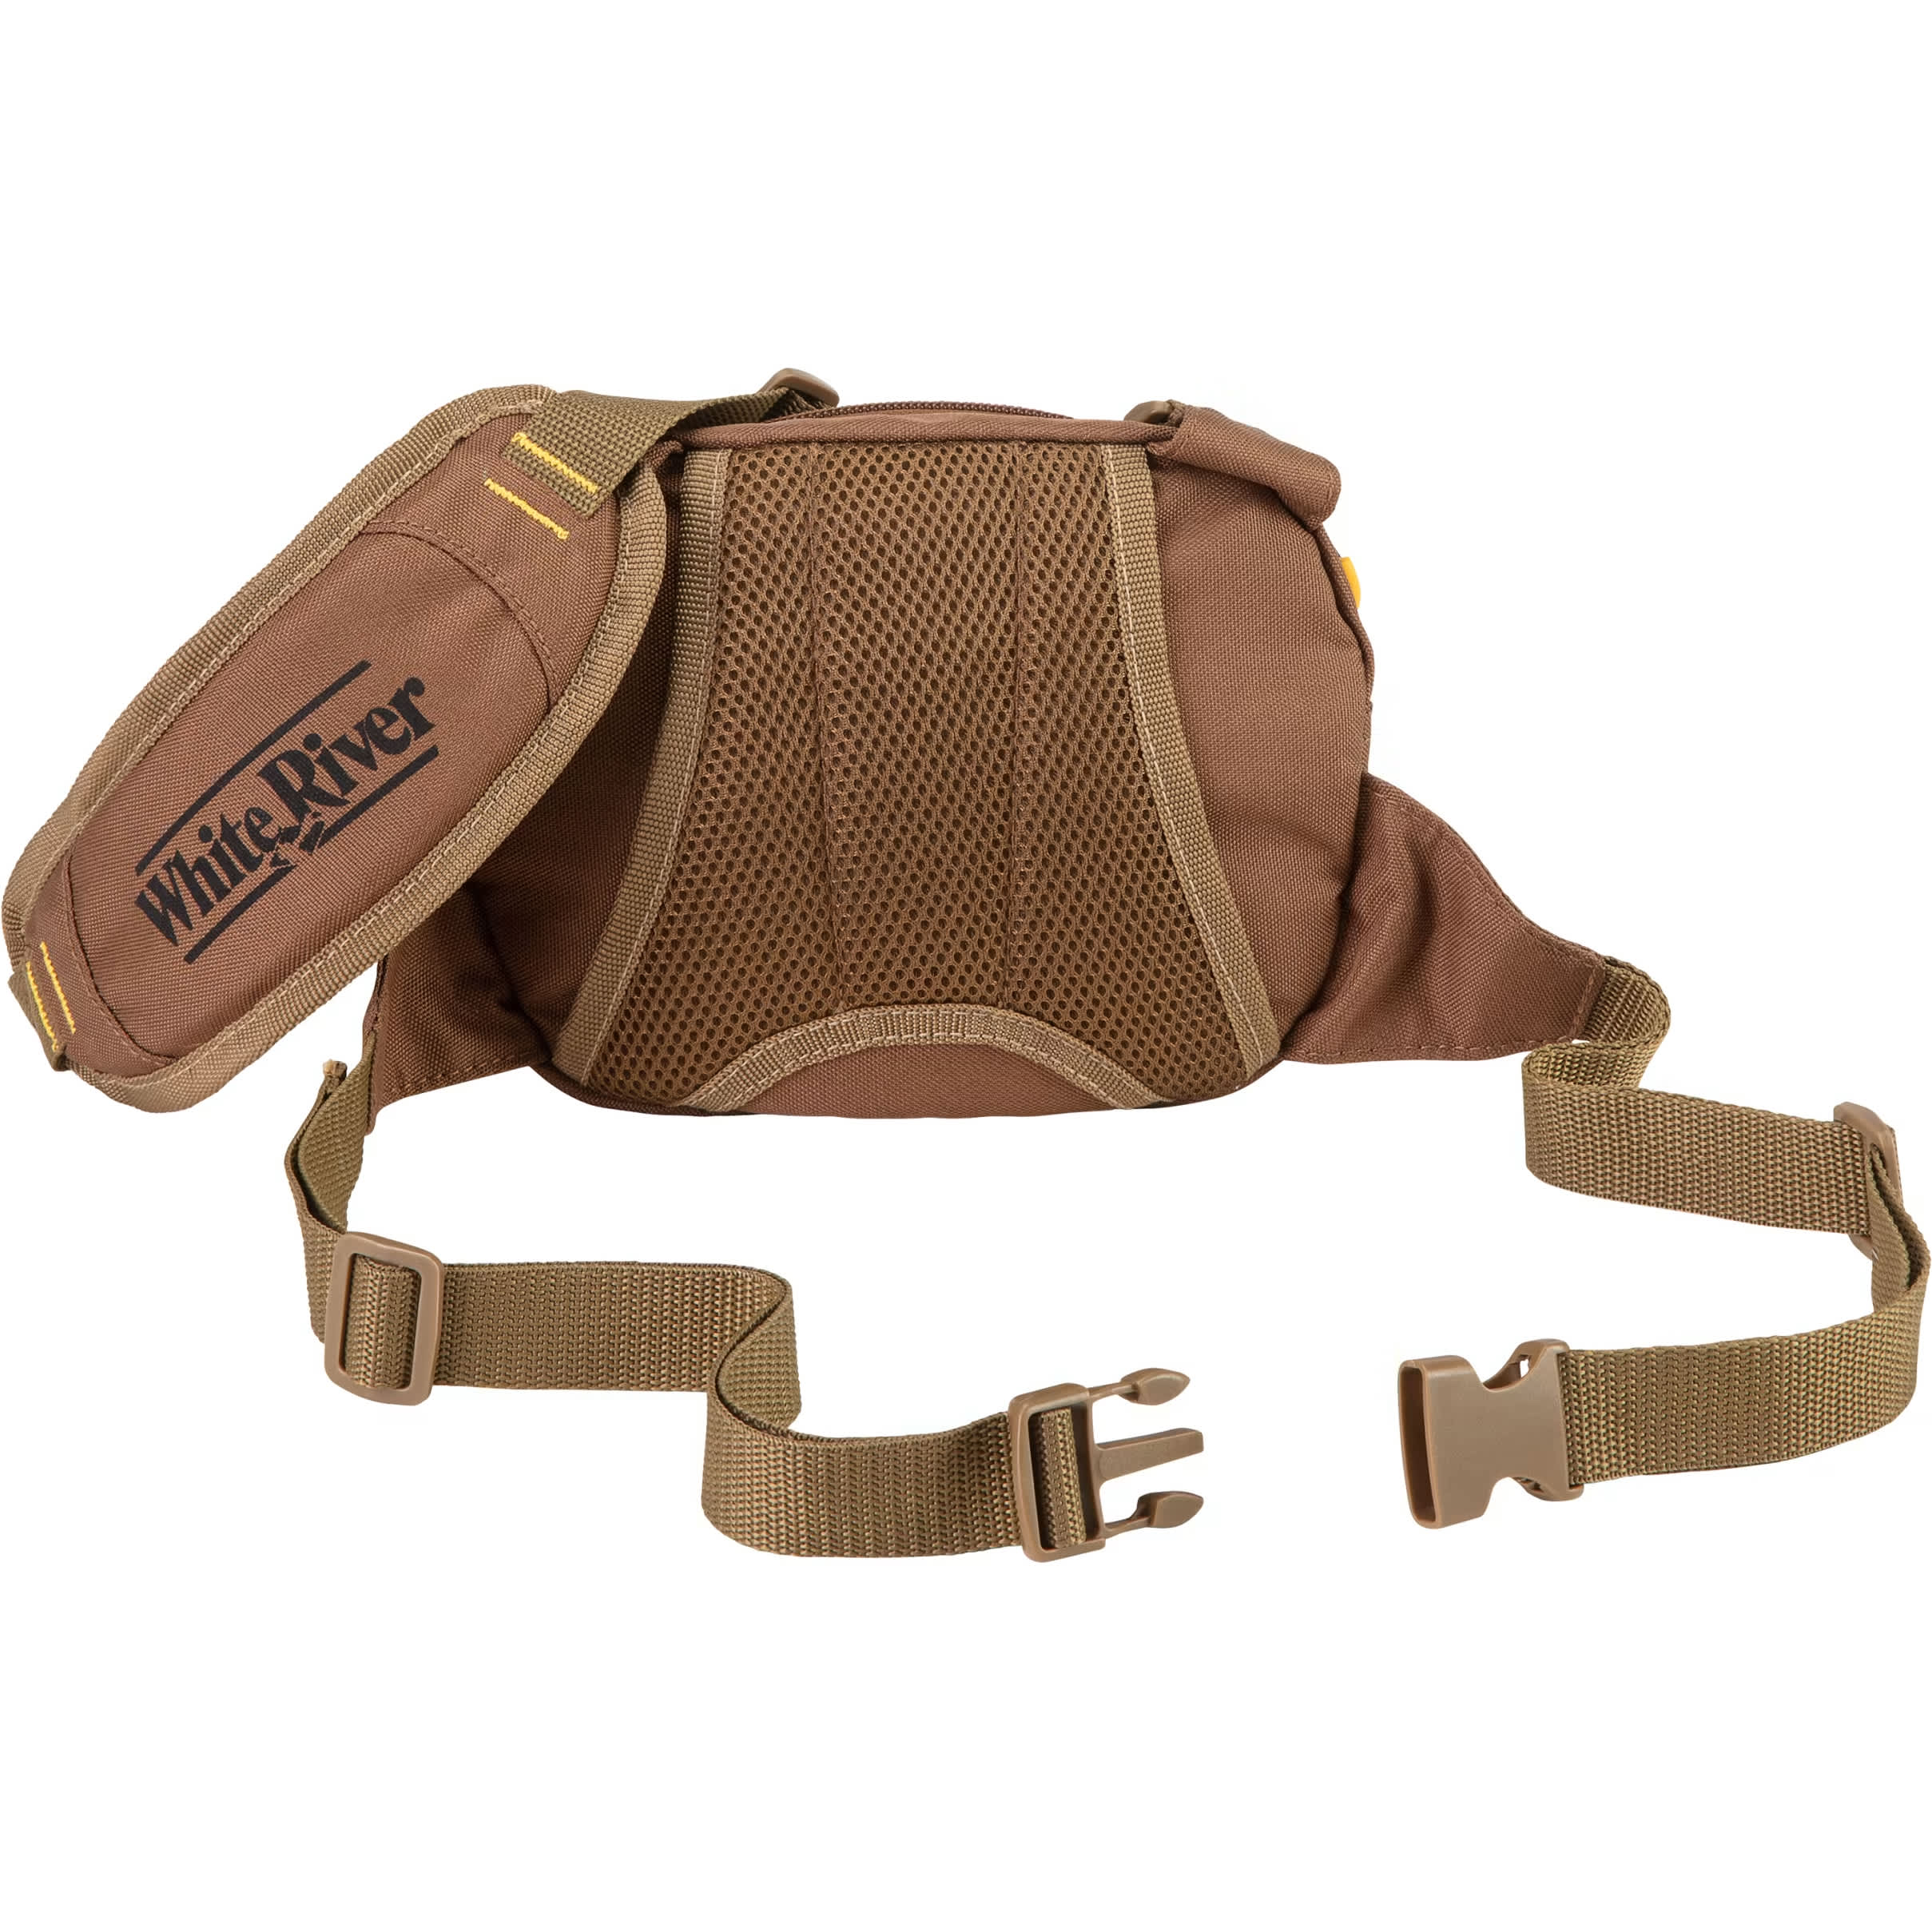 White River™ Fly Shop® 270 Chest Pack | Cabela's Canada